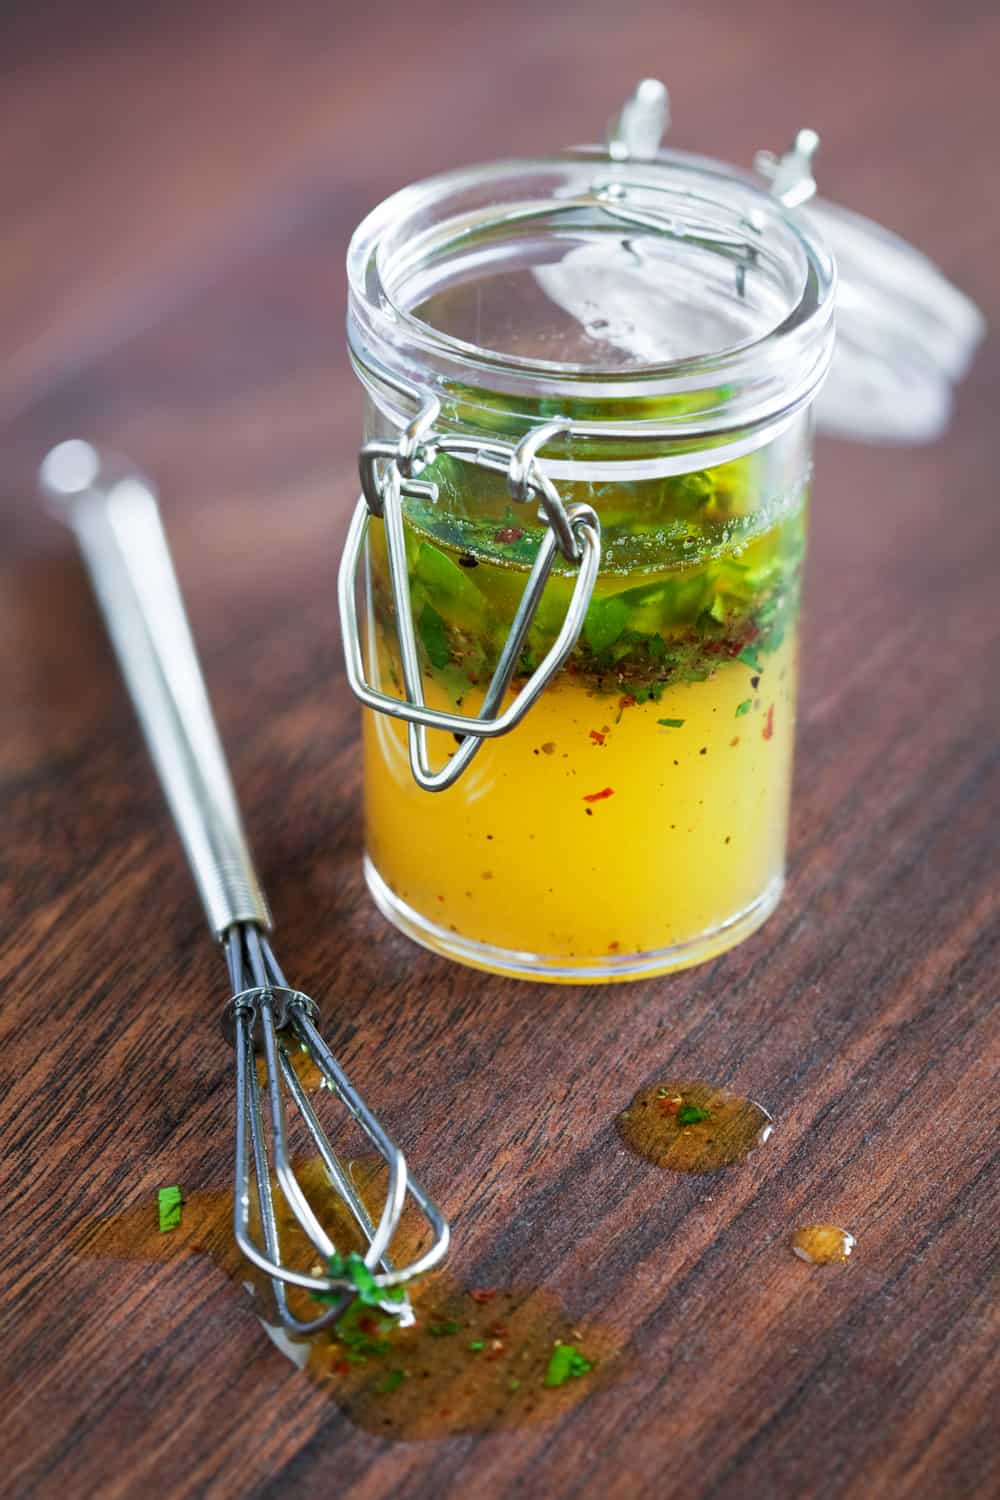 4 Tips To Tell if Salad Dressing Has Gone Bad